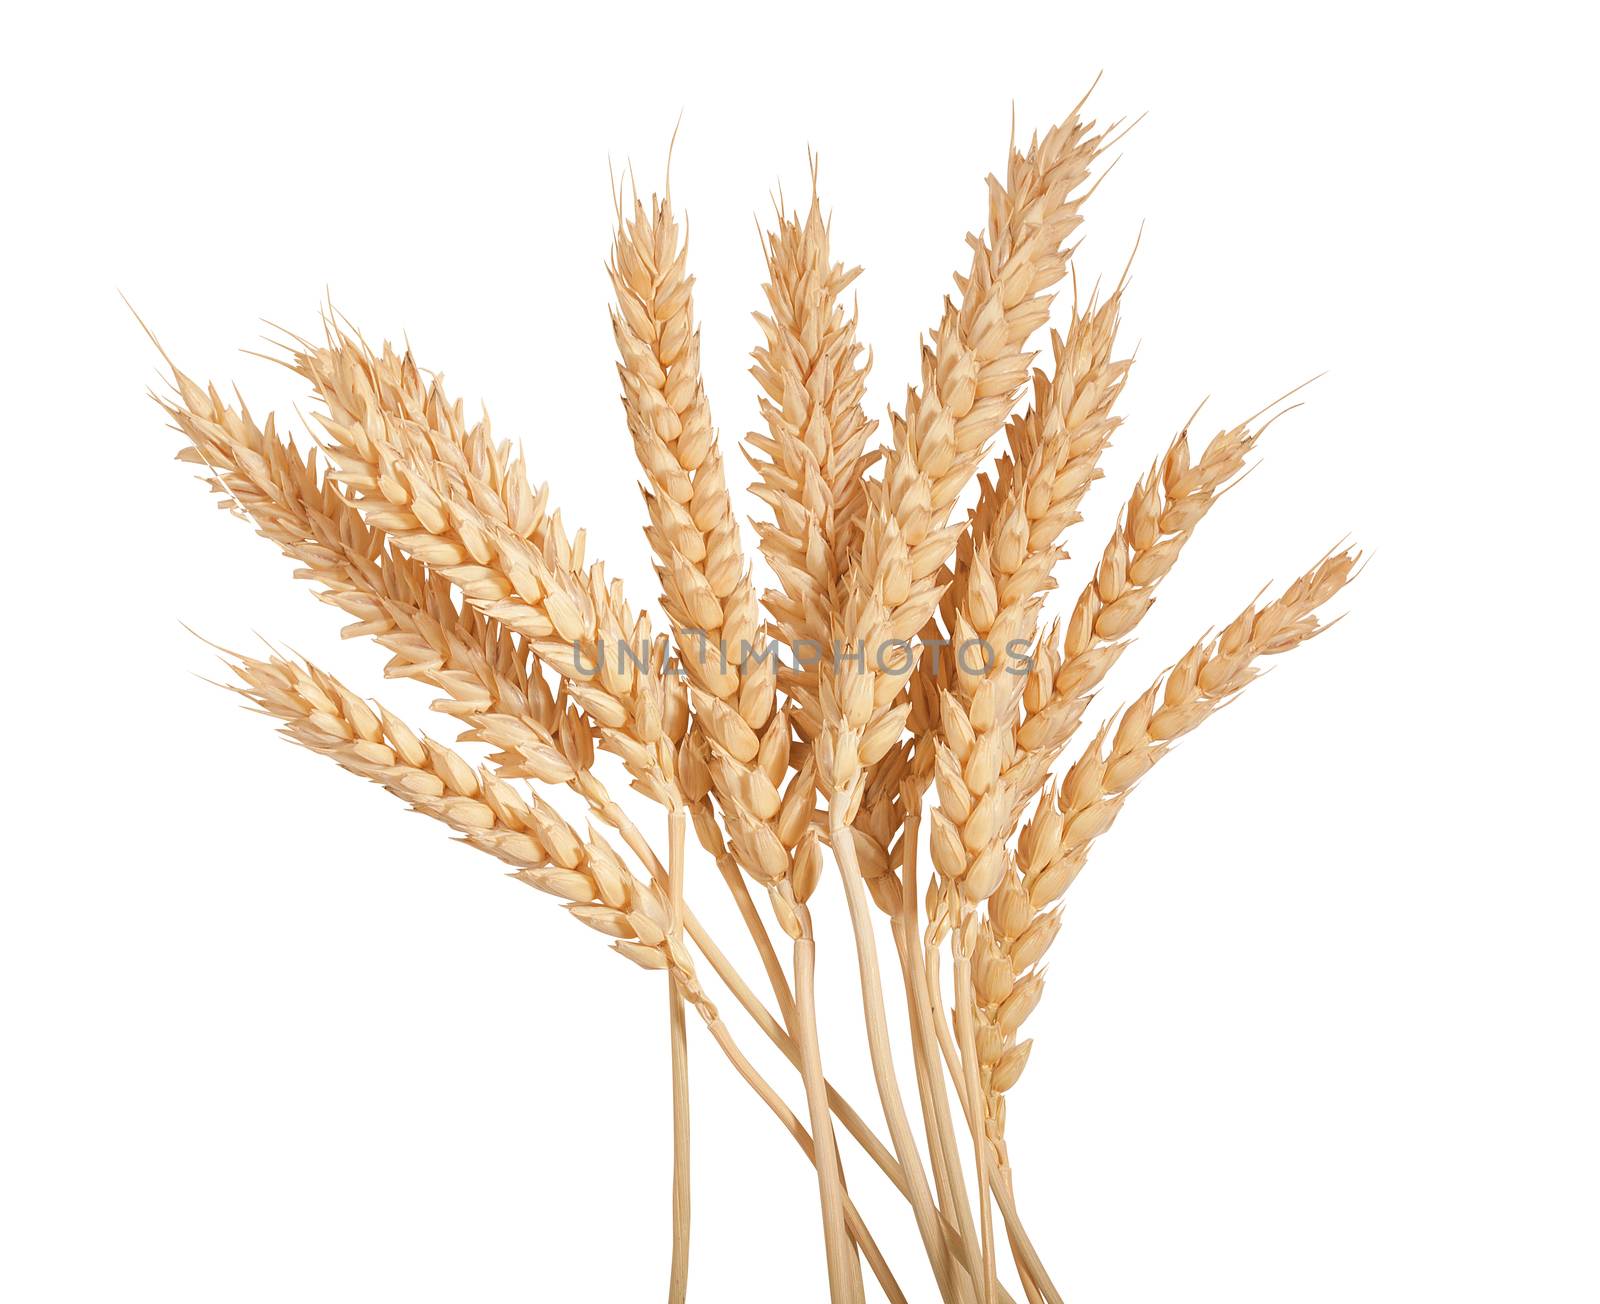 Sheaf of wheat spikelets on the white by Angorius